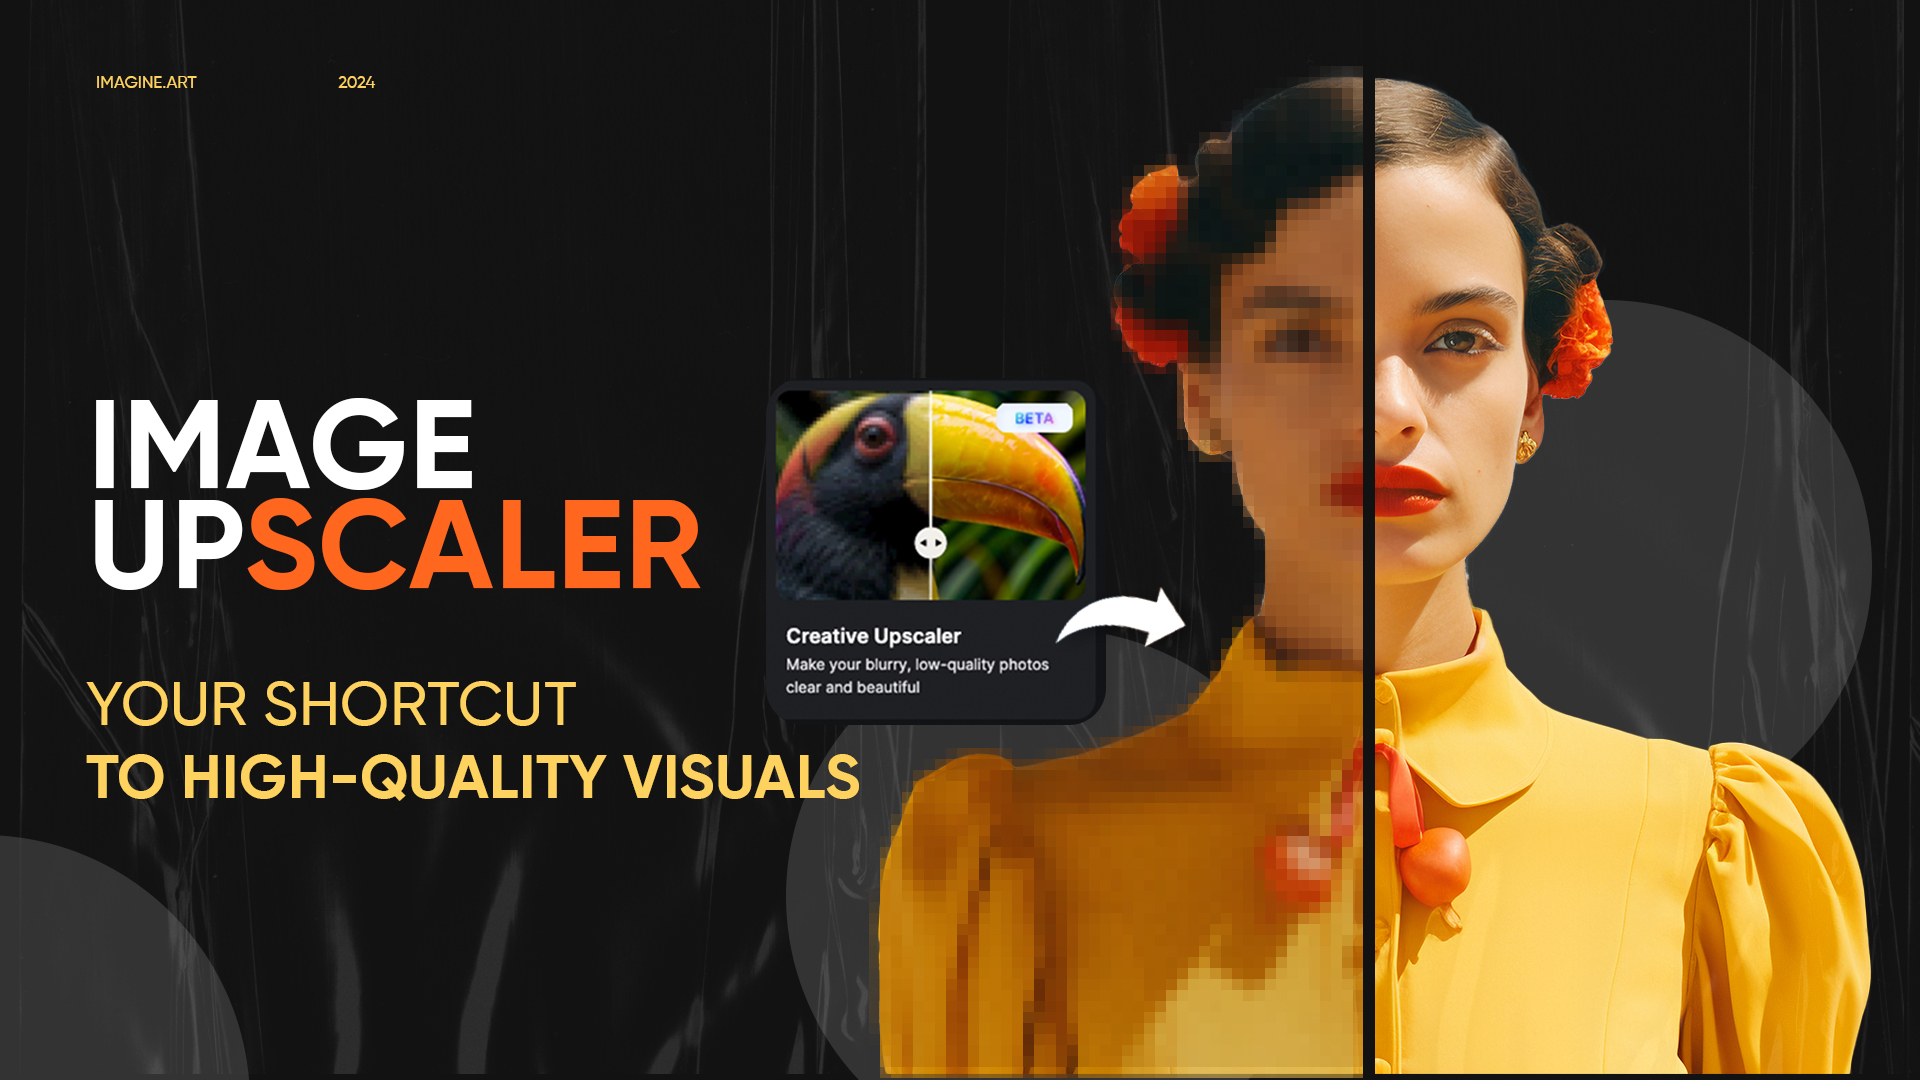 Image Upscaler: Your Shortcut to High-Quality Visuals